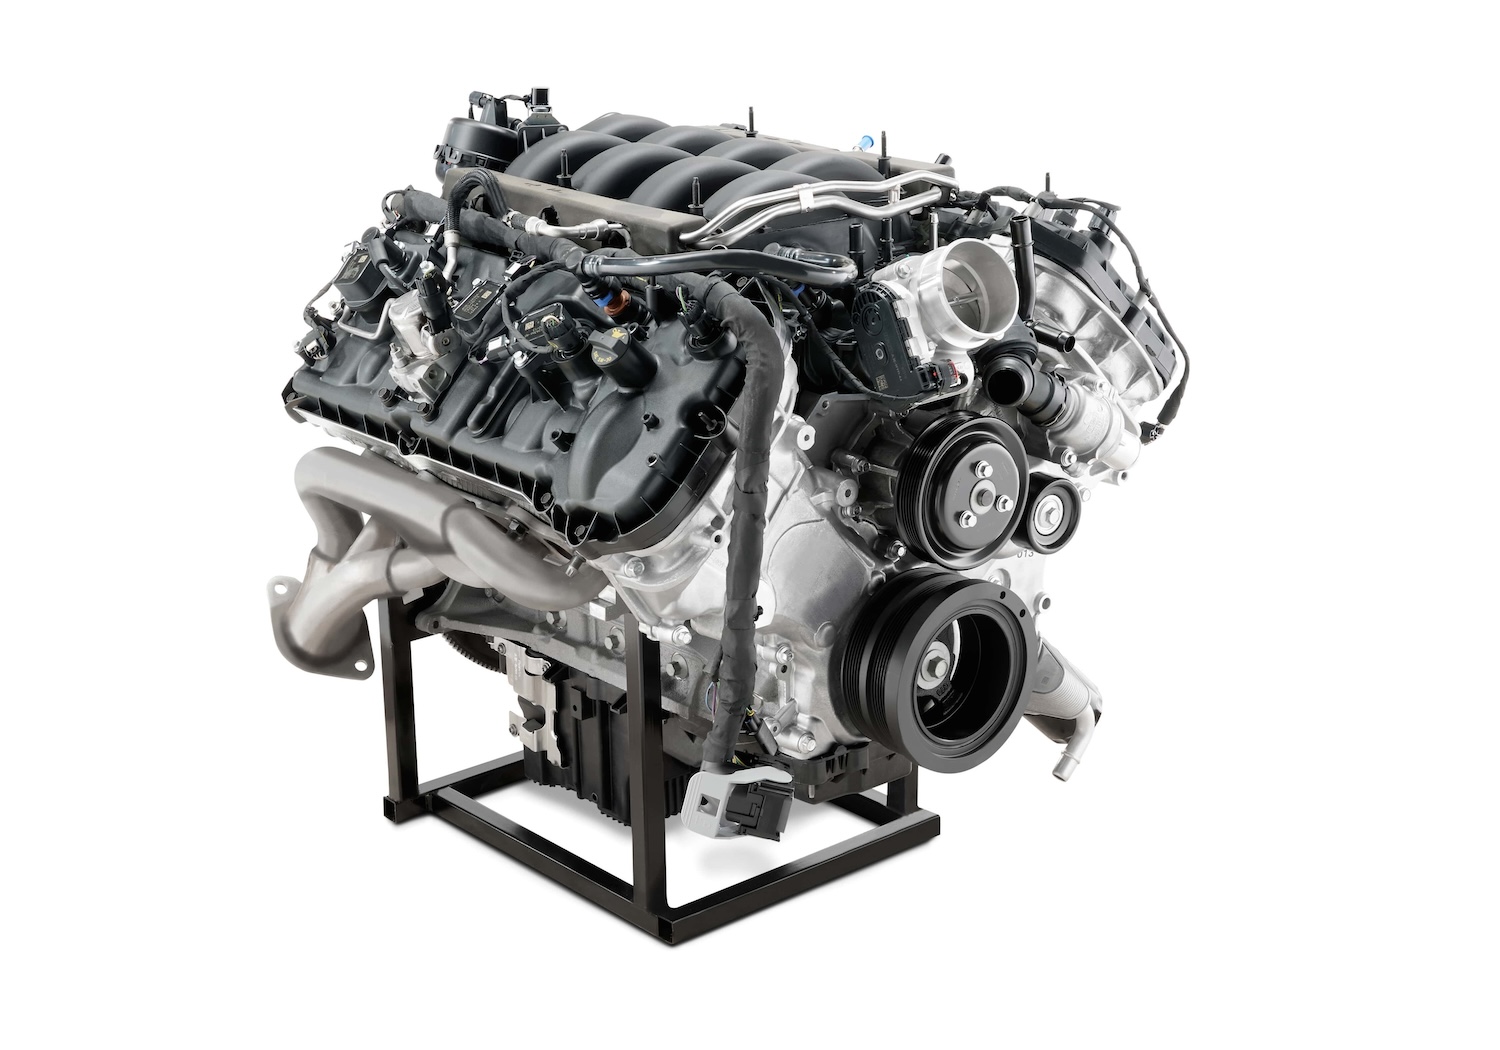 New Gen 4 Ford 5.0L V8 Coyote Crate Engines Revealed